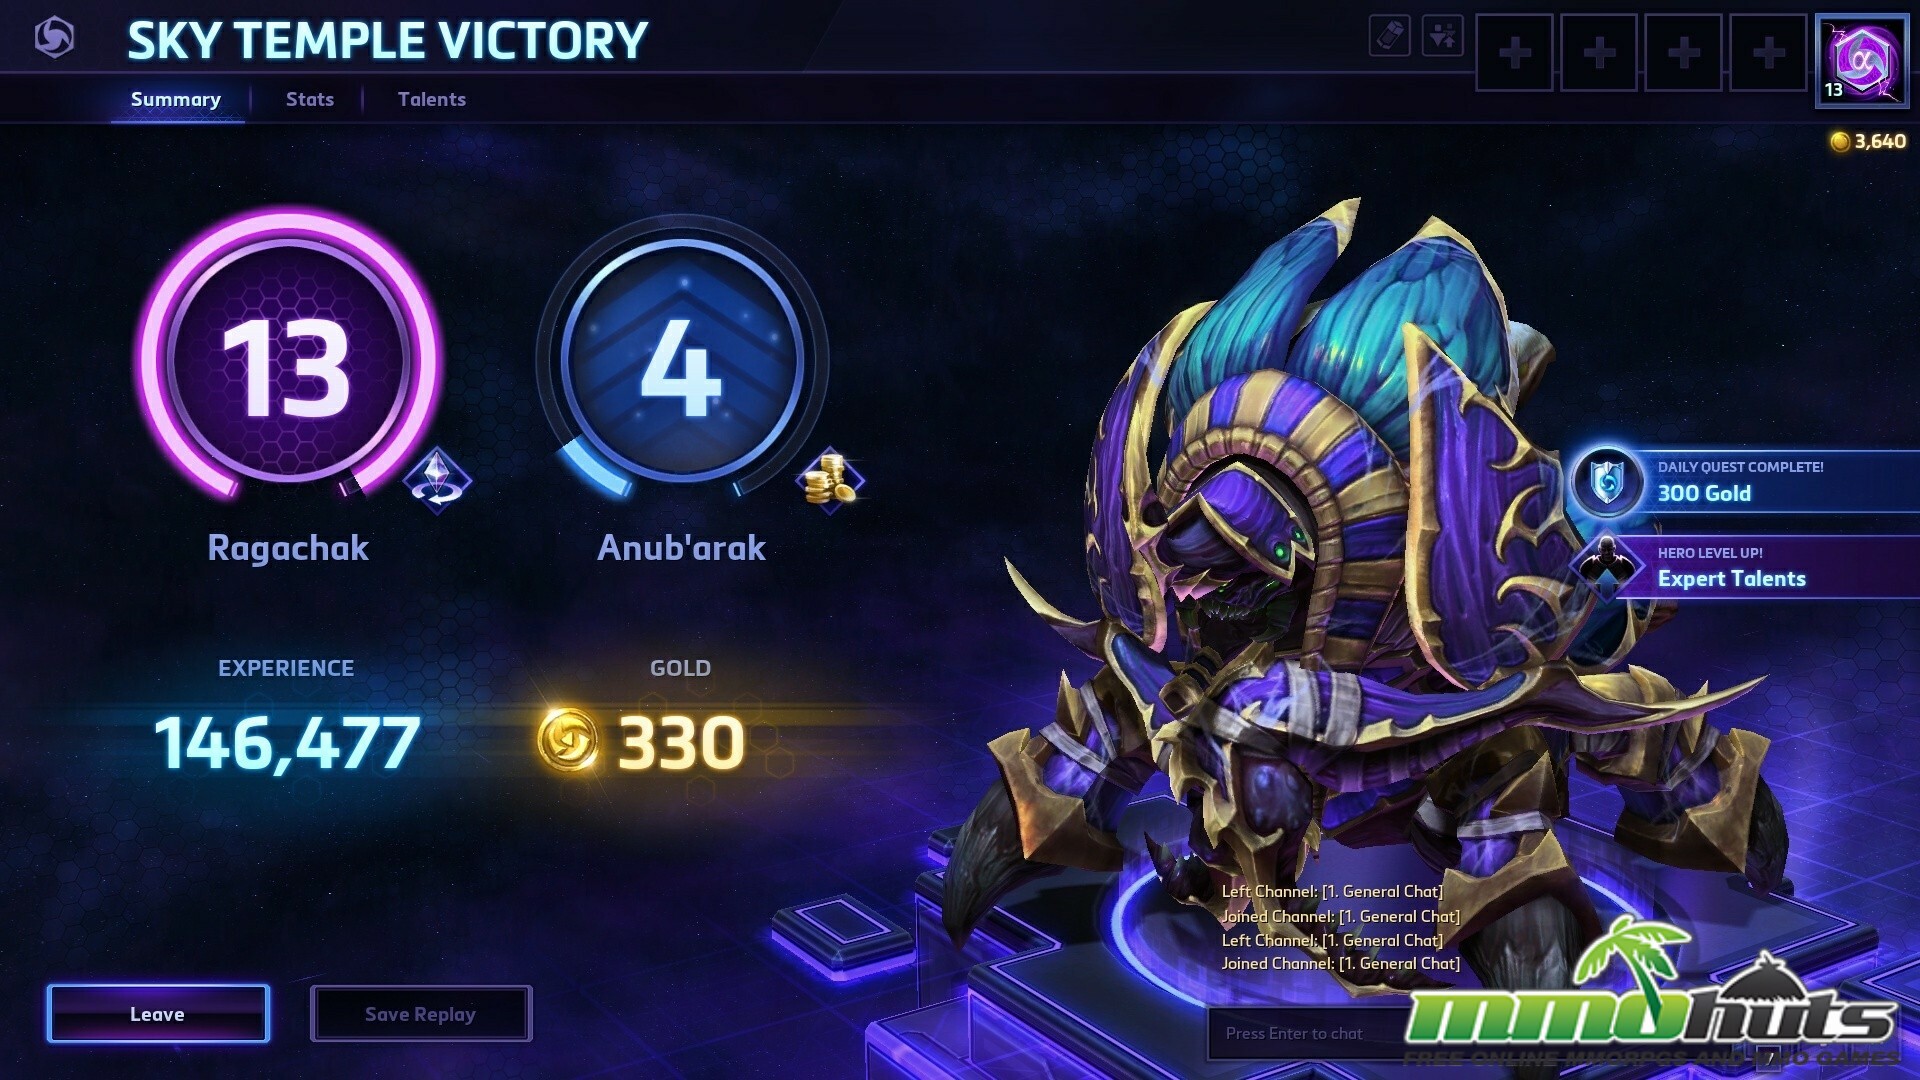 Heroes of the Storm Launch Review